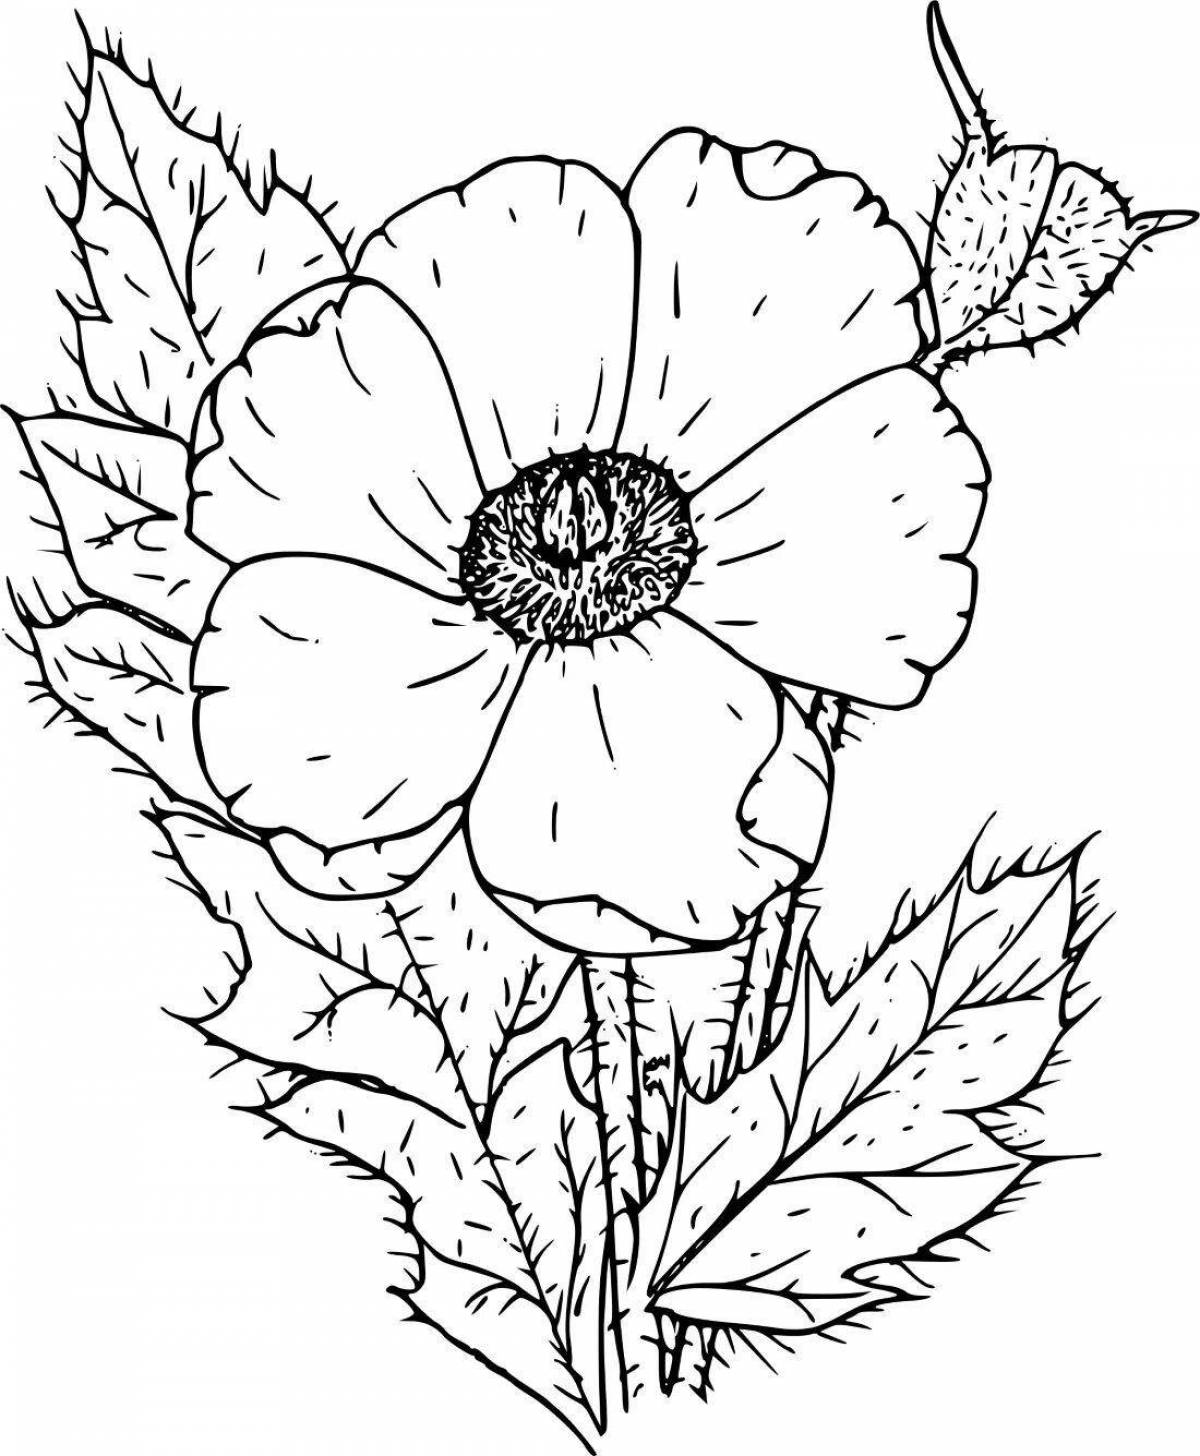 Coloring book beckoning poppy